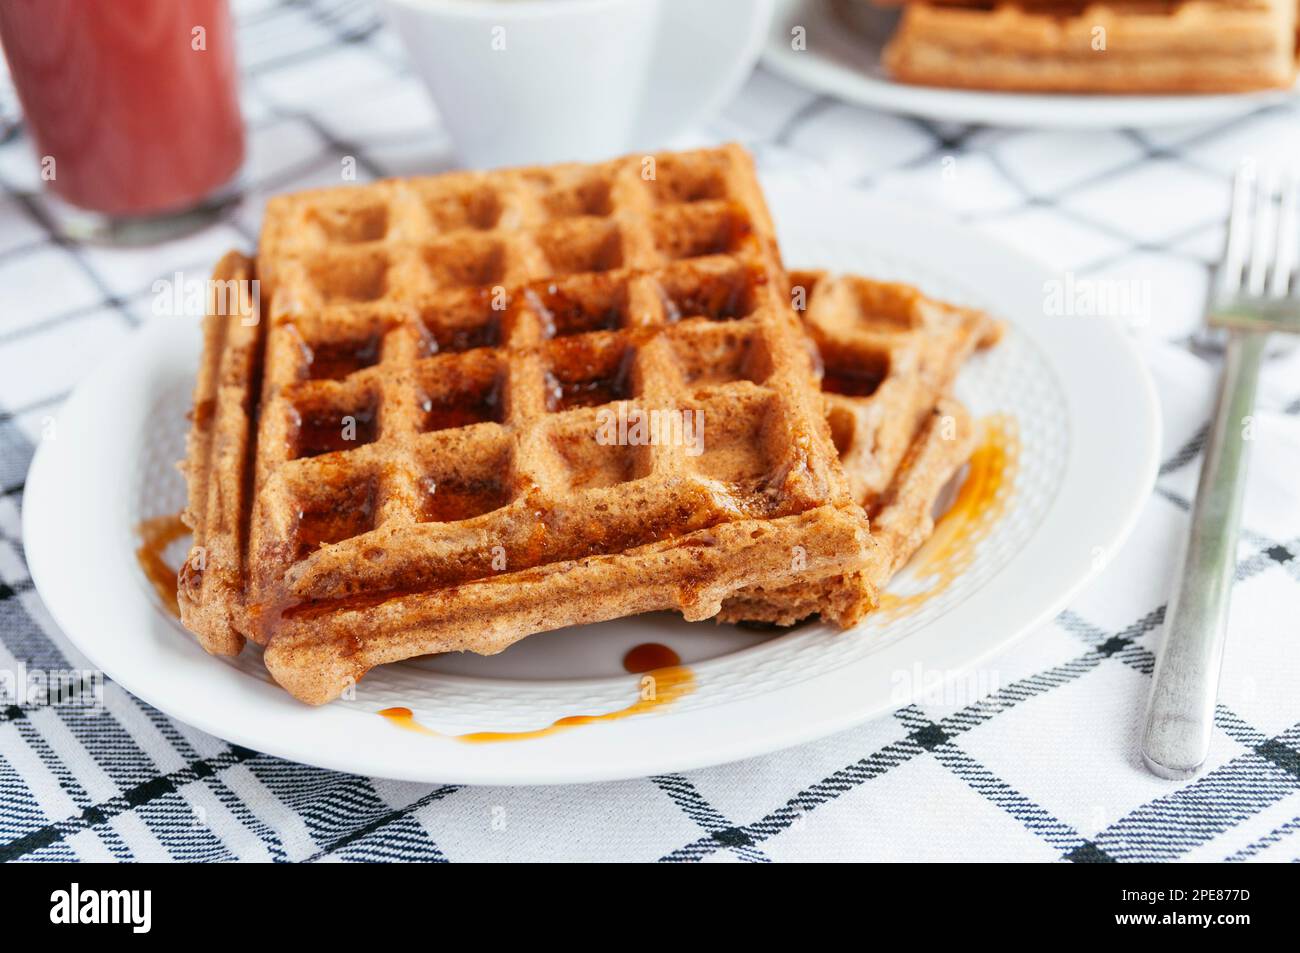 Carrot waffles for breakfast with maple syrup and coffee Stock Photo